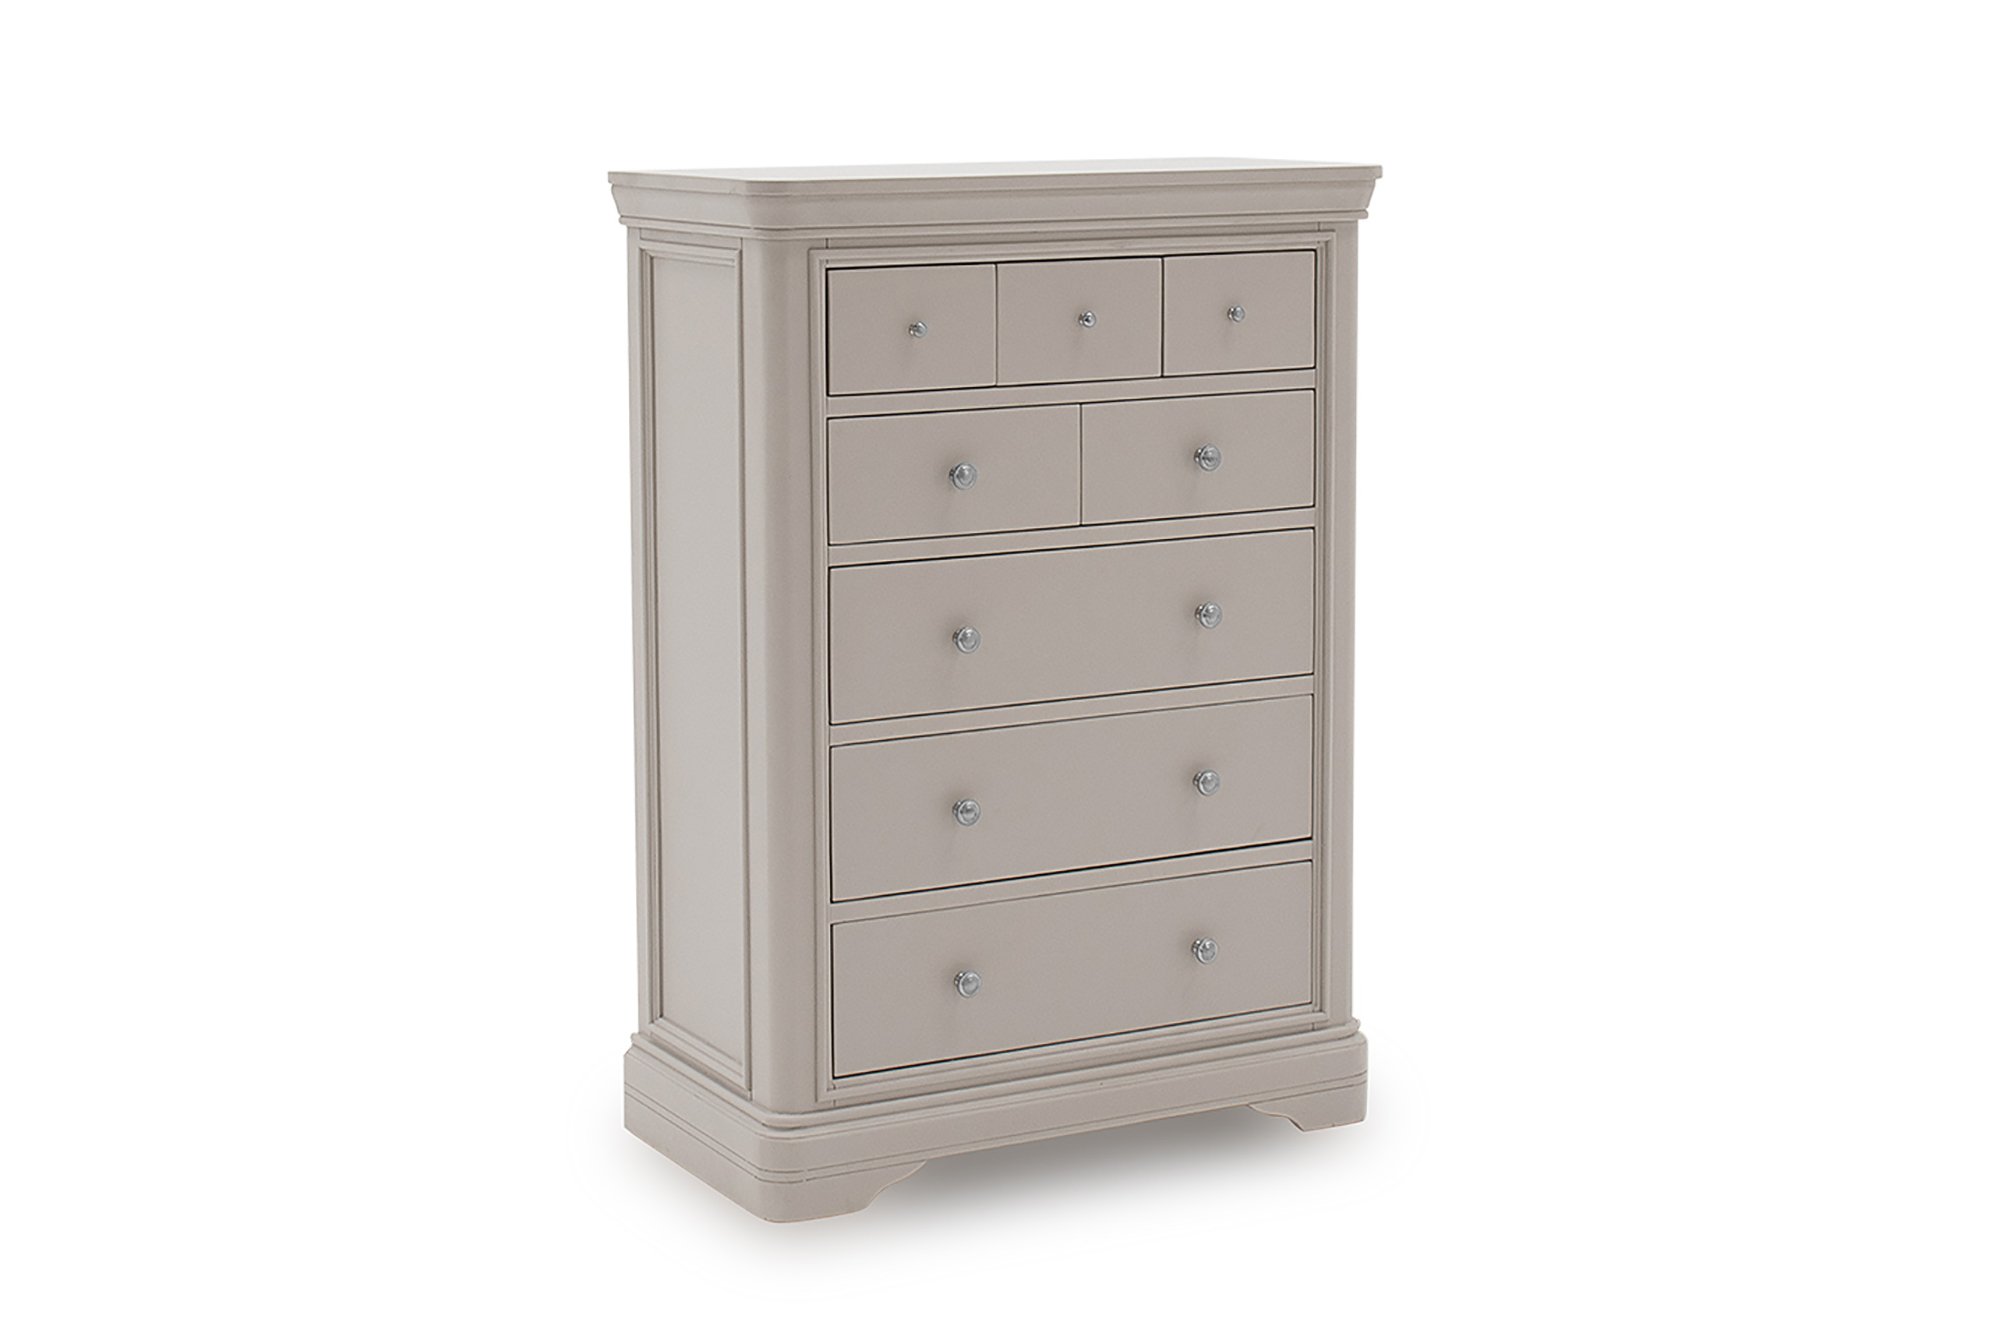 Mabel Tall 8 Drawer Chest Of Drawers, 8 Drawer Dresser Tall